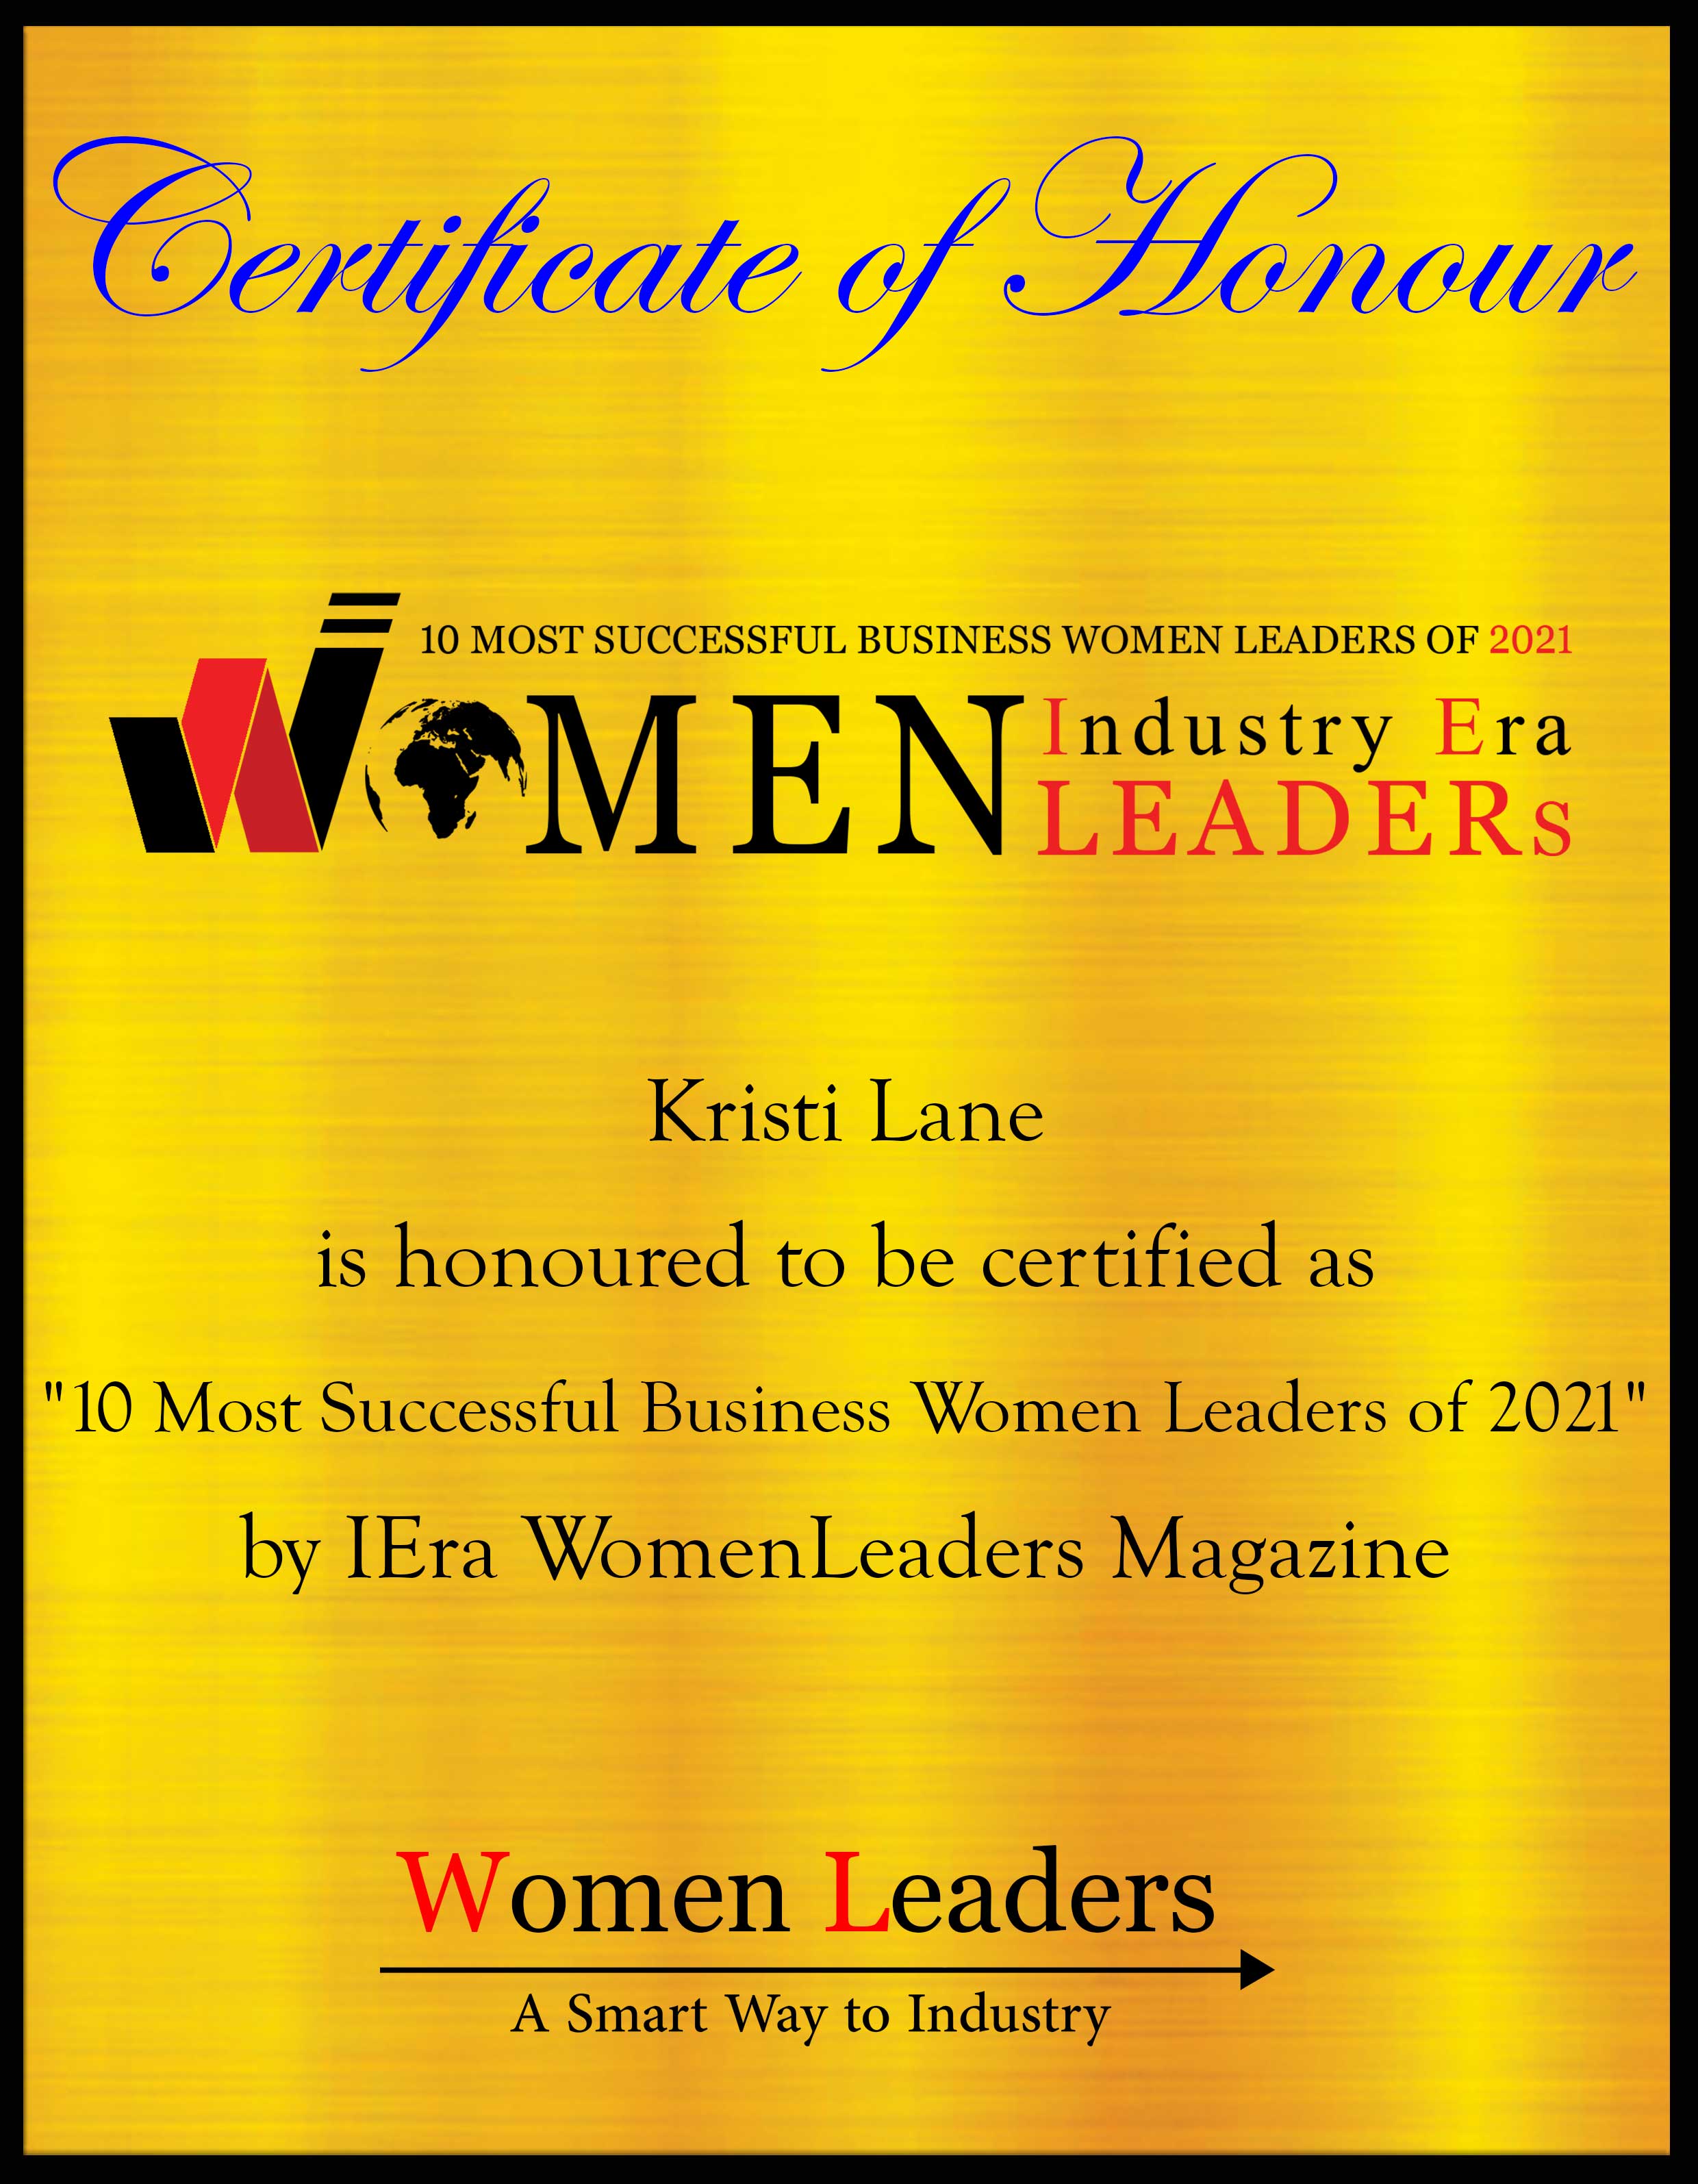 Kristi Lane, SHRM-SCP, VP of Talent Management at Healthcare Triangle, Inc, Most Successful Business Women Leaders of 2021